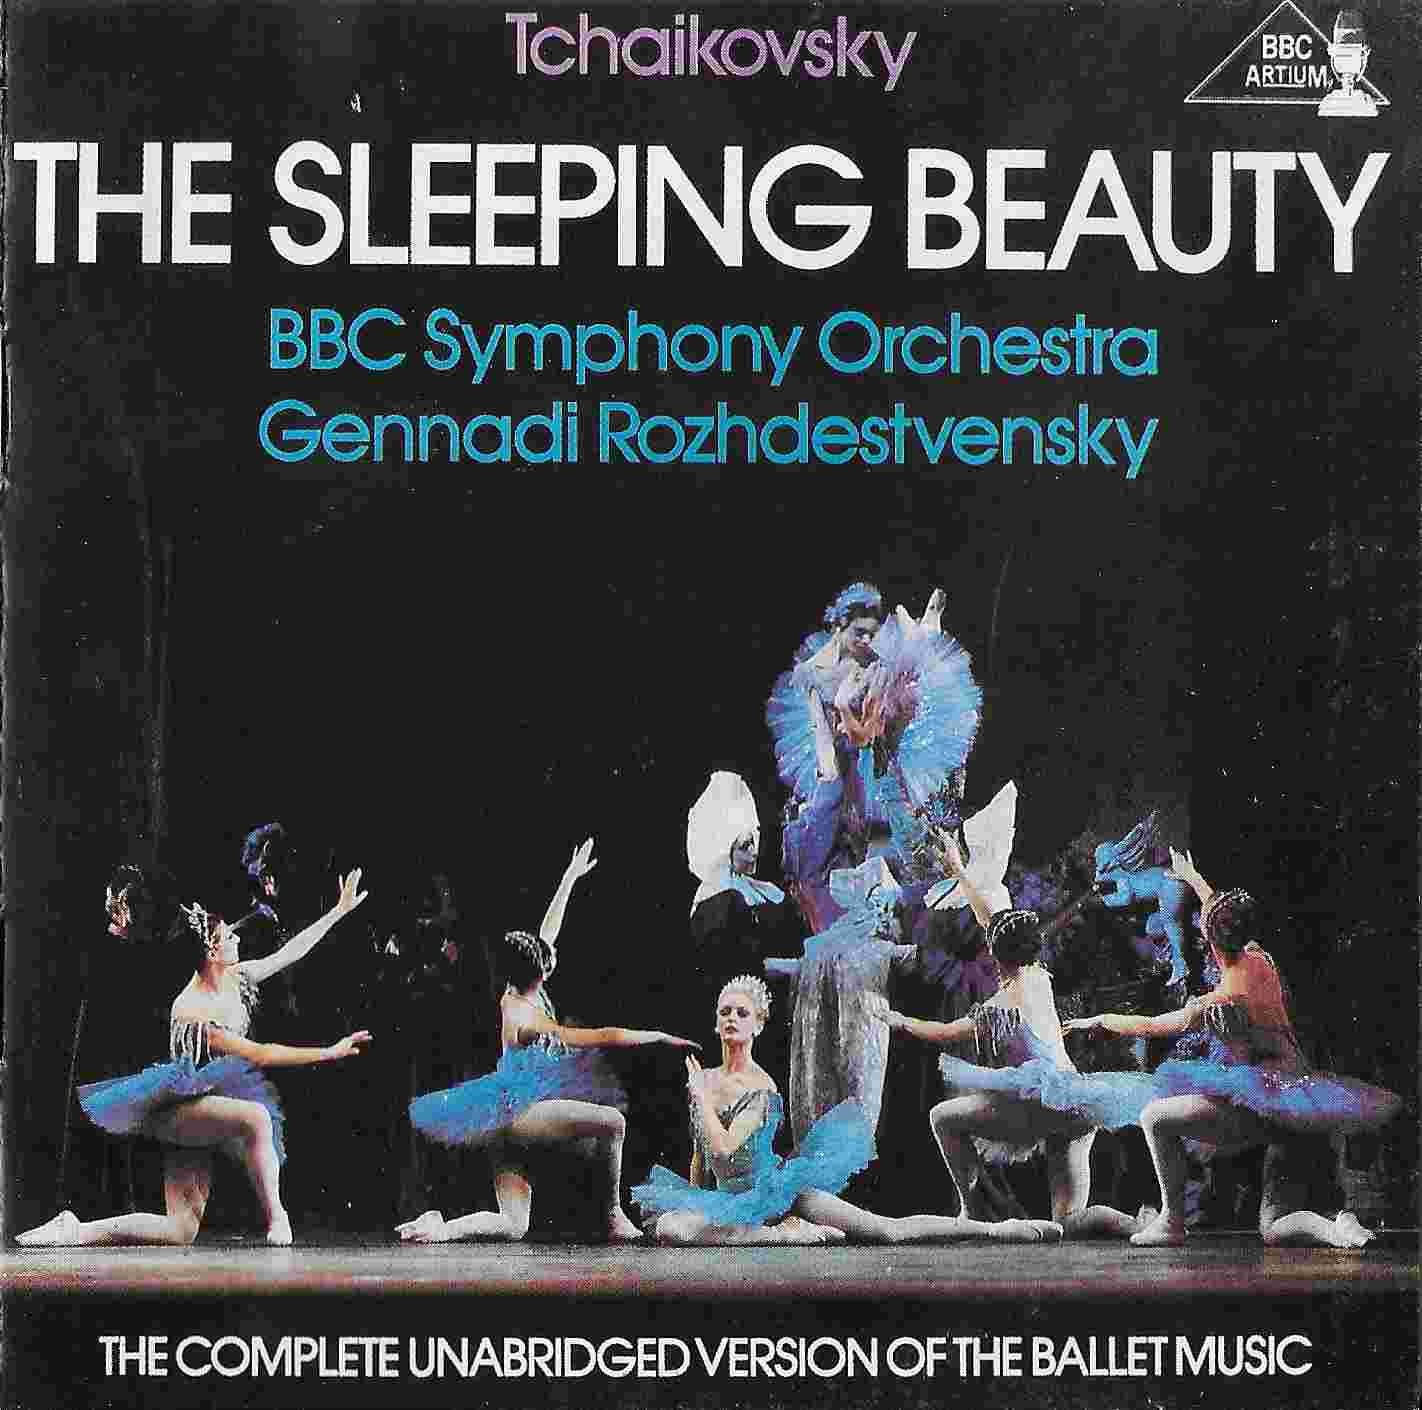 Picture of The sleeping beauty by artist Tchaikovsky from the BBC cds - Records and Tapes library